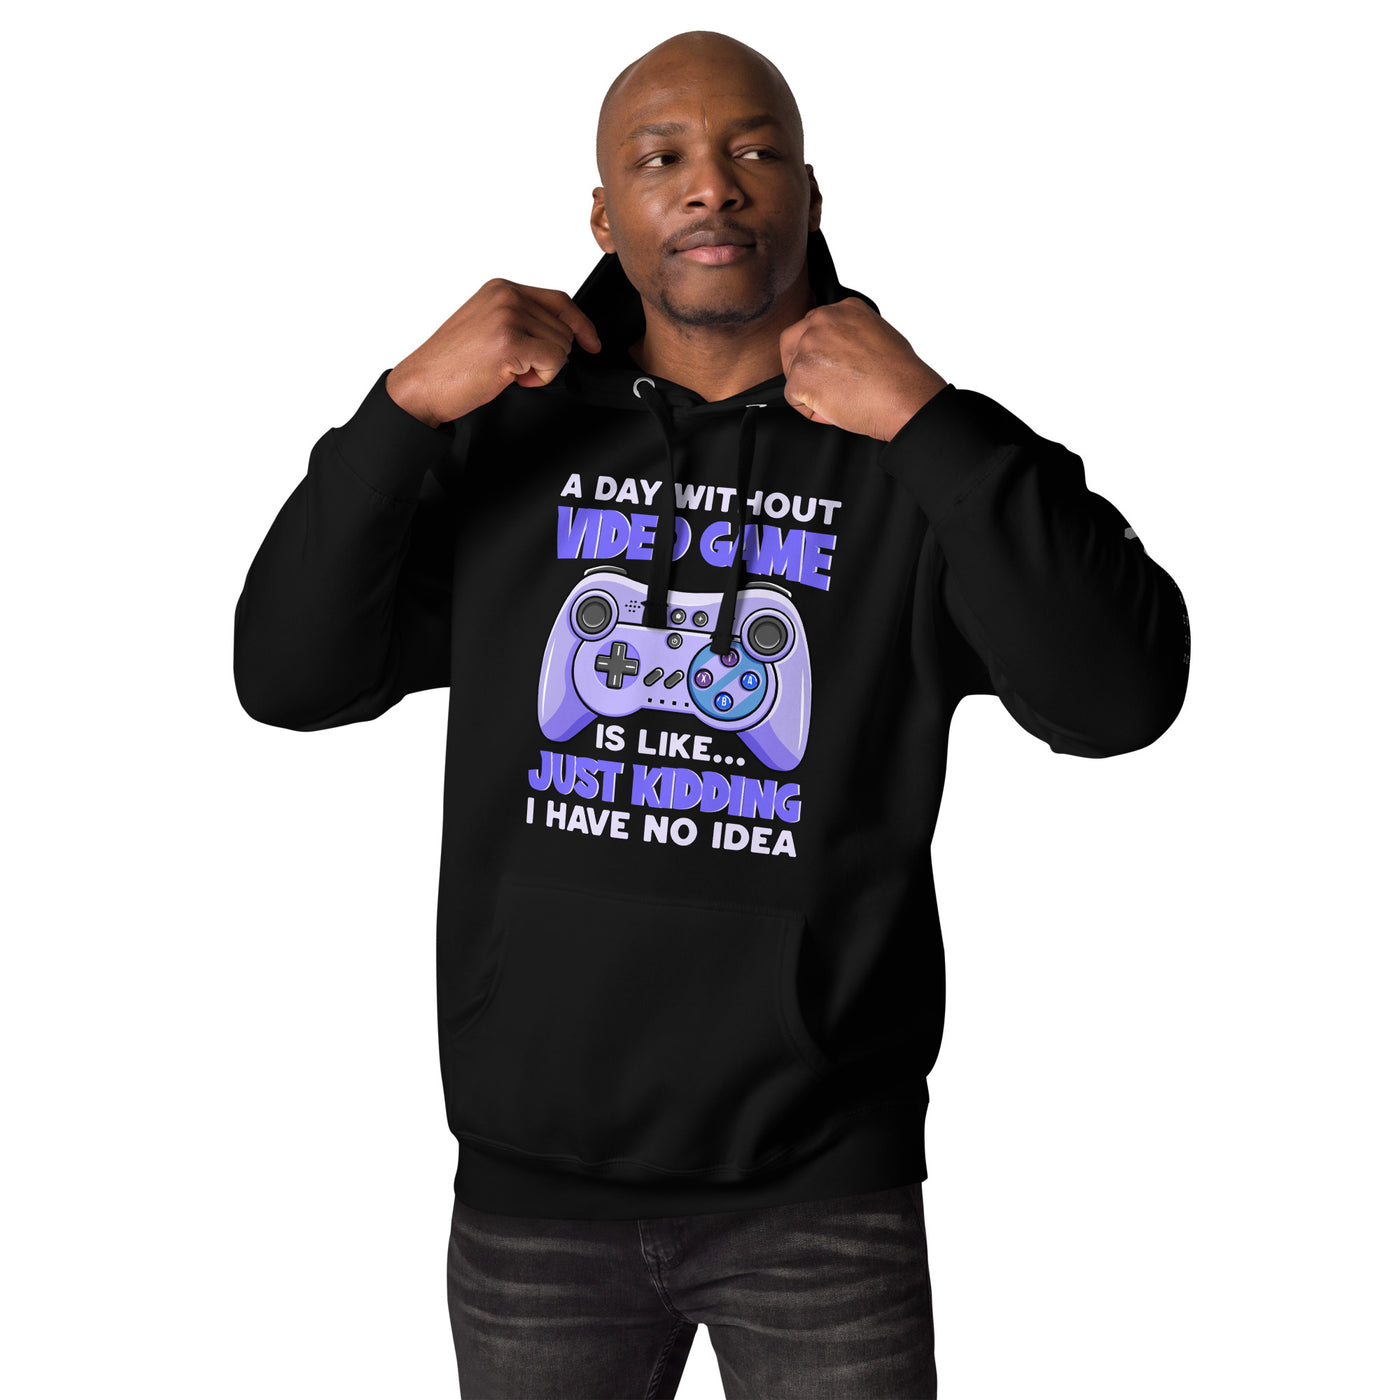 A Day without Video Game is; Just Kidding! I have no Idea - Unisex Hoodie